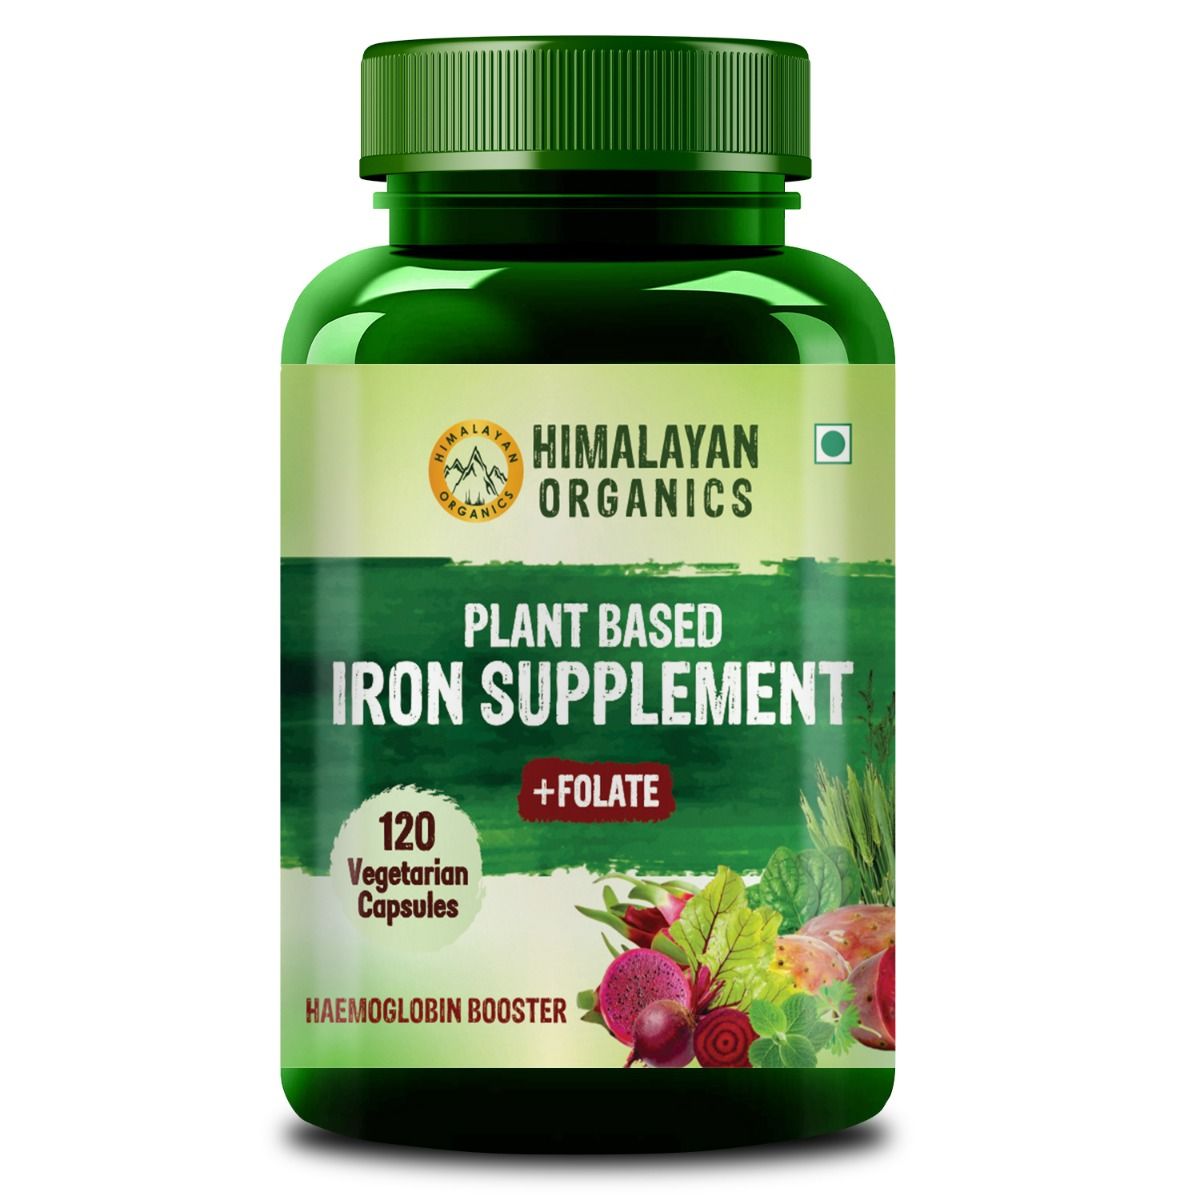 Himalayan Organics Plant Based Iron Supplement with Folate, 120 Capsules, Pack of 1 